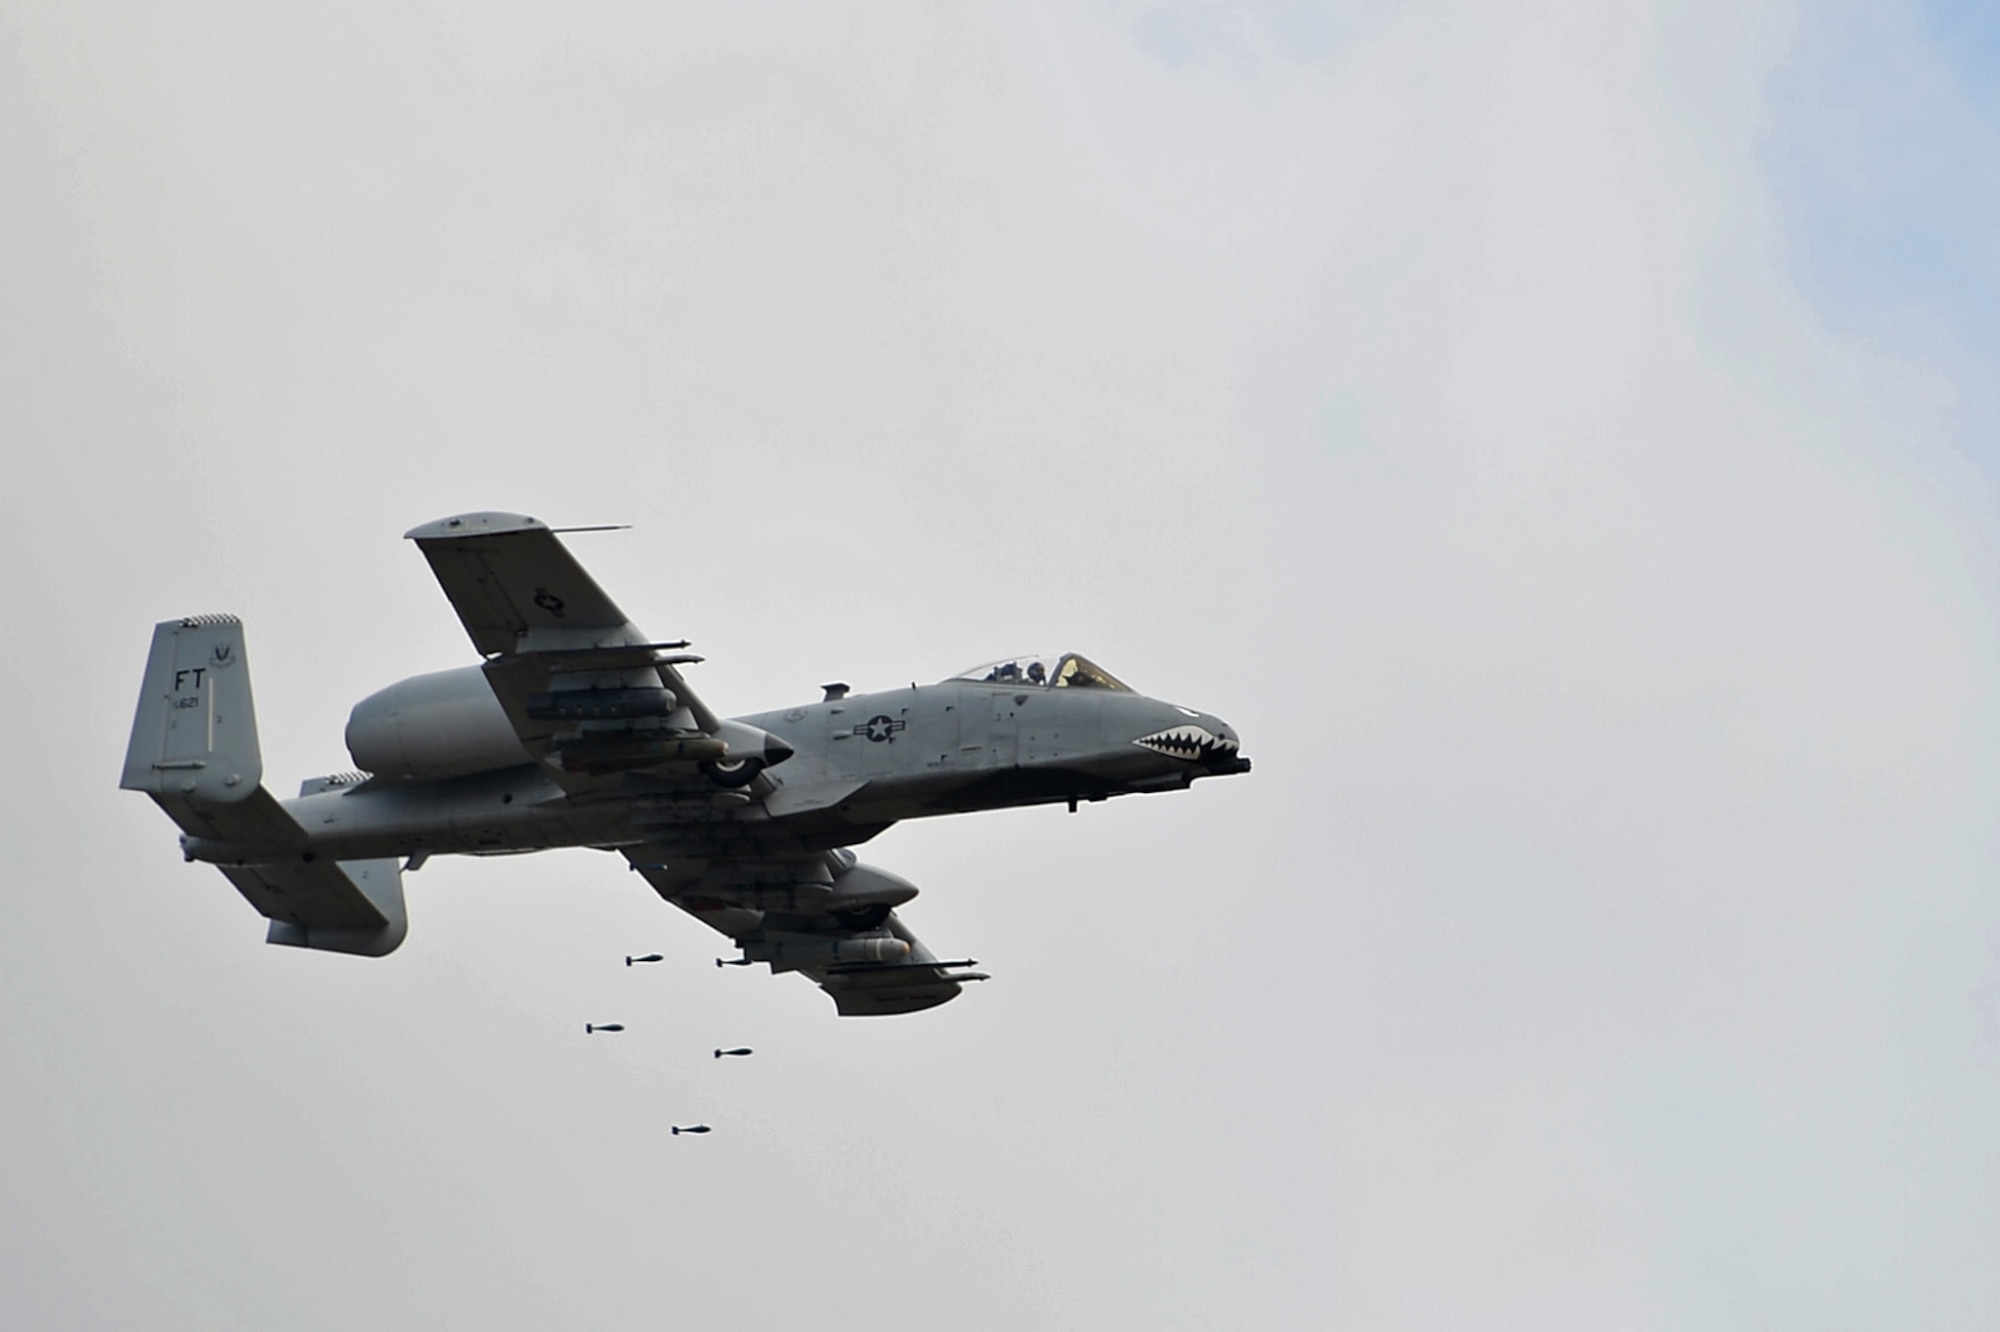 An A-10C Thunderbolt II assigned to the 76th Fighter Squadron at Moody Air Force Base, Ga., releases bomb dummy units during an East Coast Airpower Demonstration at Poinsett Electronic Combat Range, Wedgefield, S.C., Oct. 27, 2016. A-10s serve combatant commanders downrange by providing close-air support, which aids in troop movement by clearing a safe path. (U.S. Air Force photo by Airman 1st Class Christopher Maldonado) 